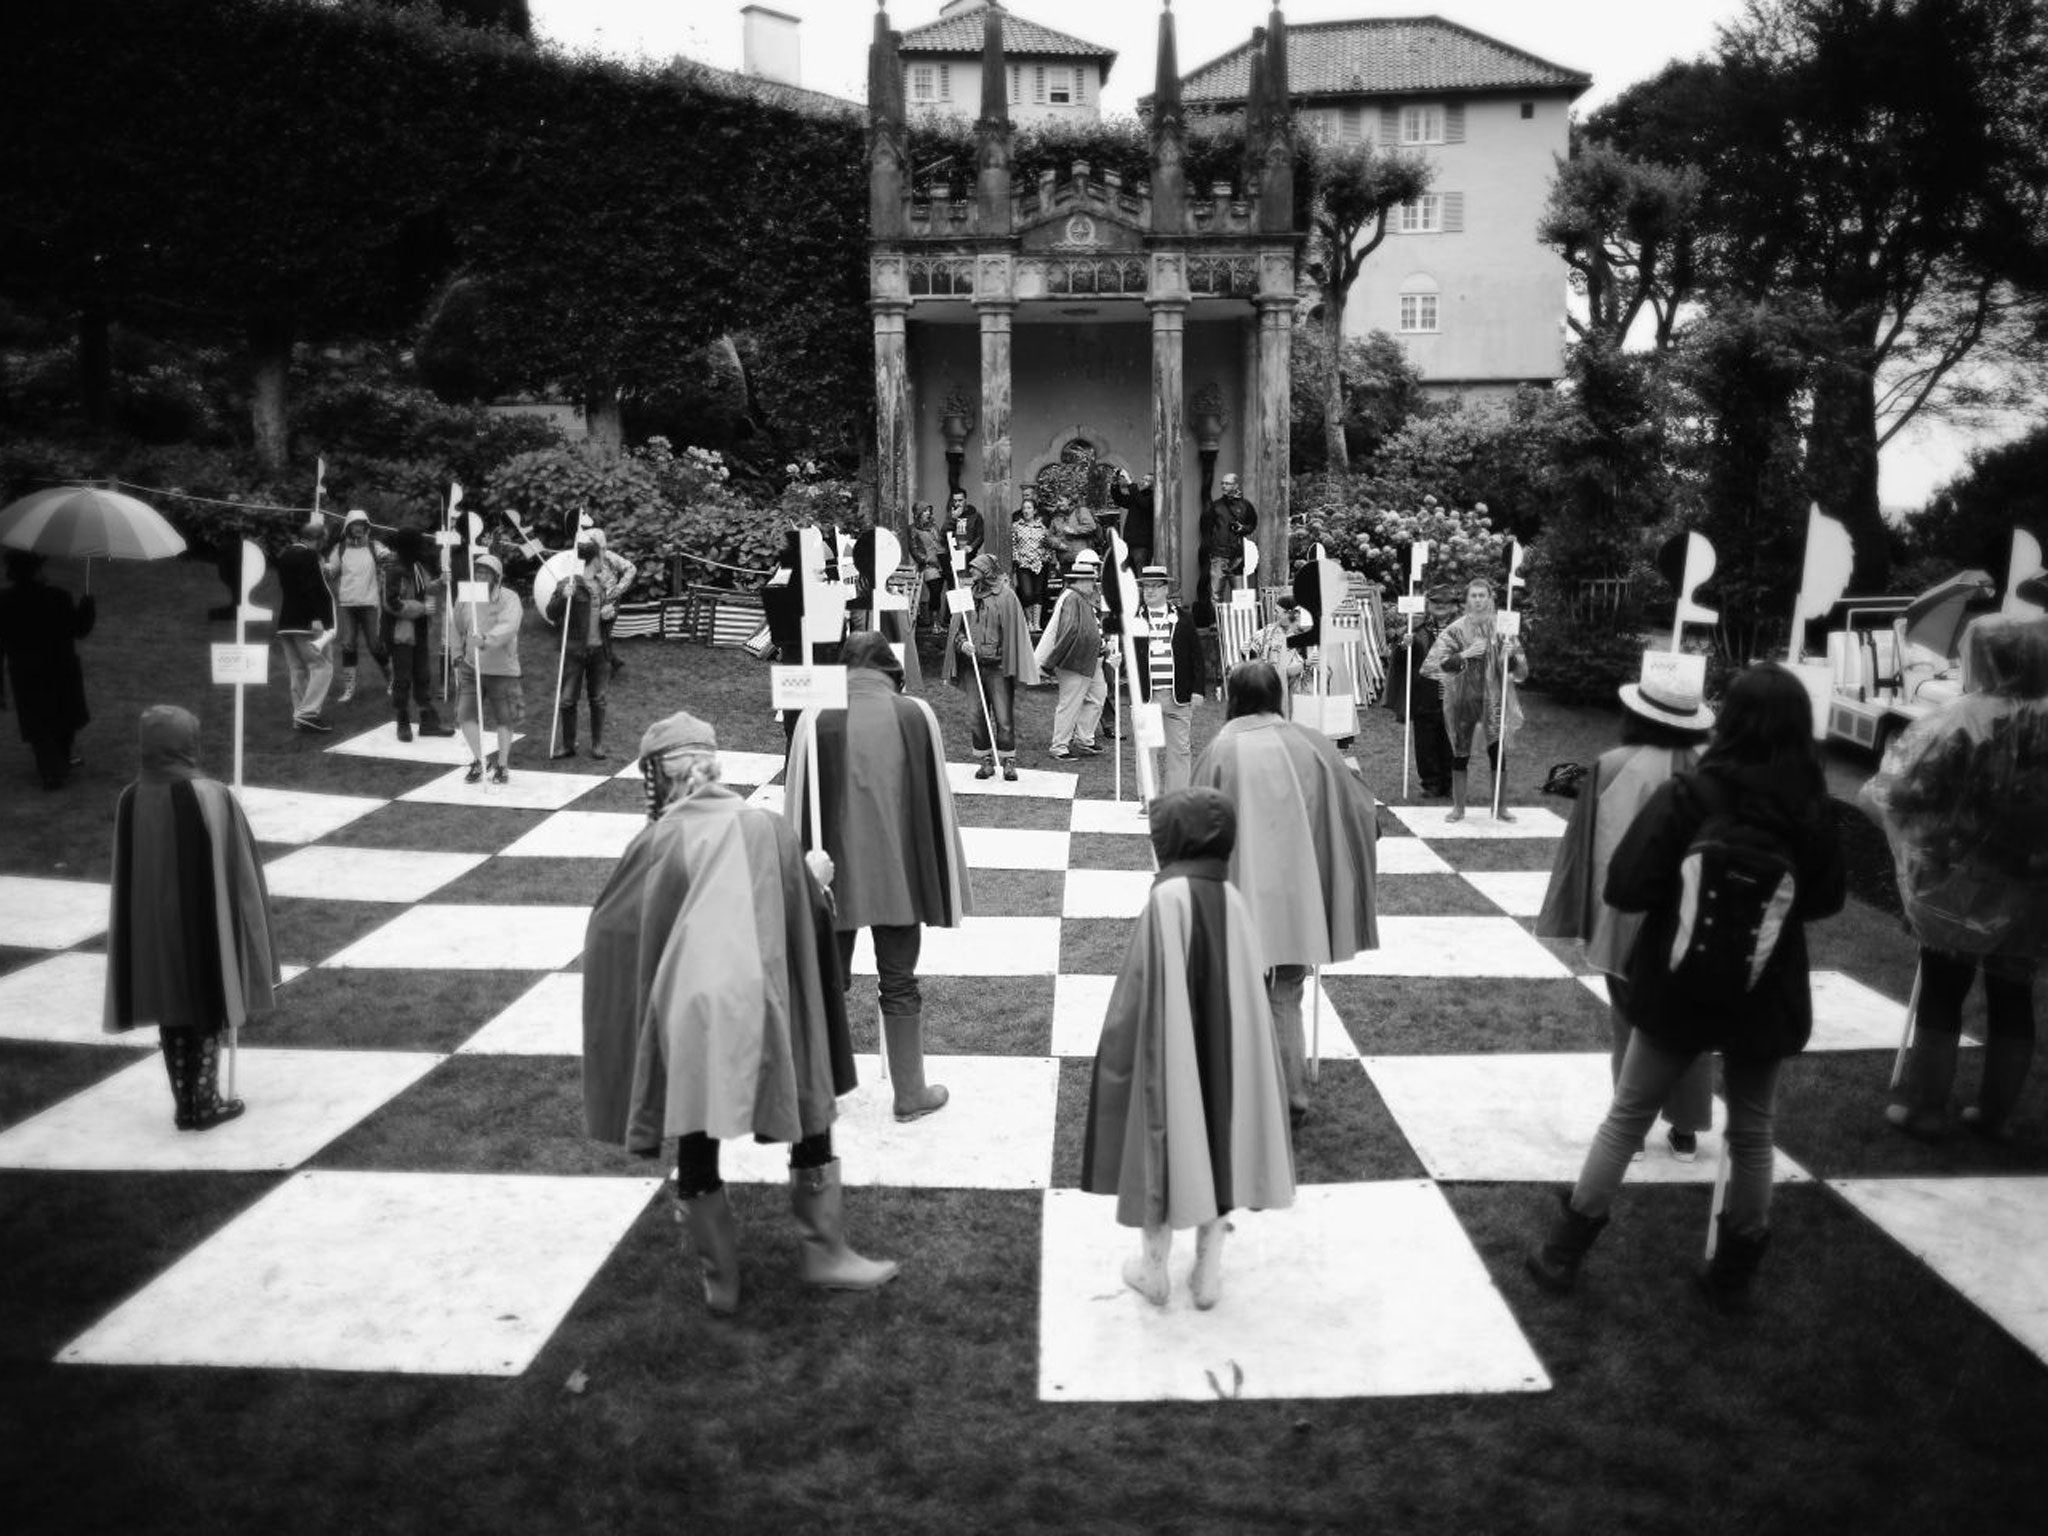 Festival-goers play on the human chess board from the cult TV series The Prisoner